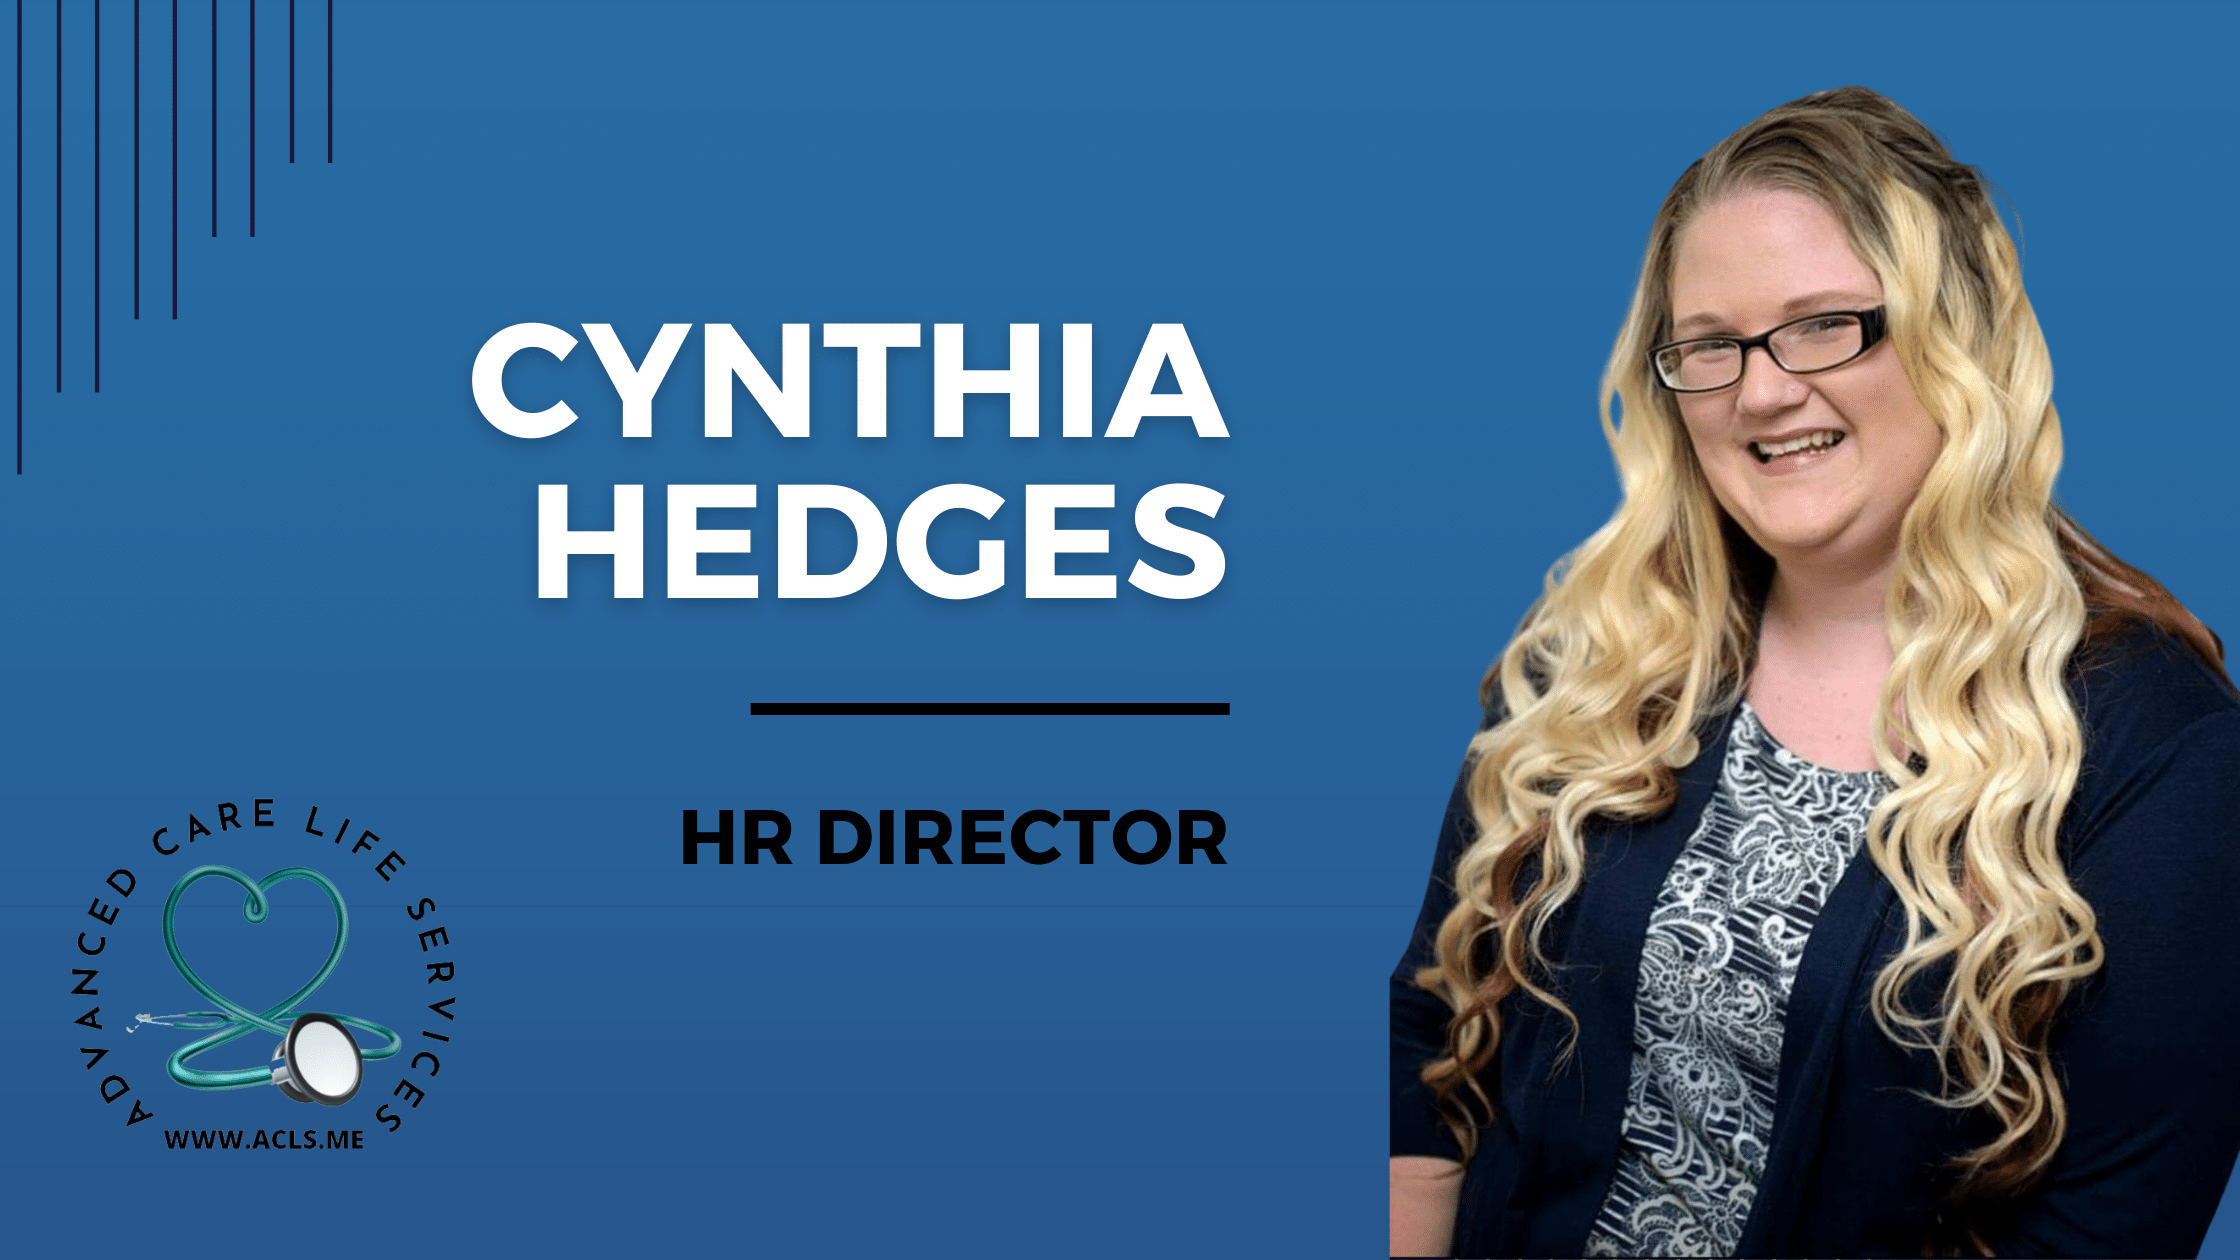 Meet Our HR Director, Cynthia Hedges